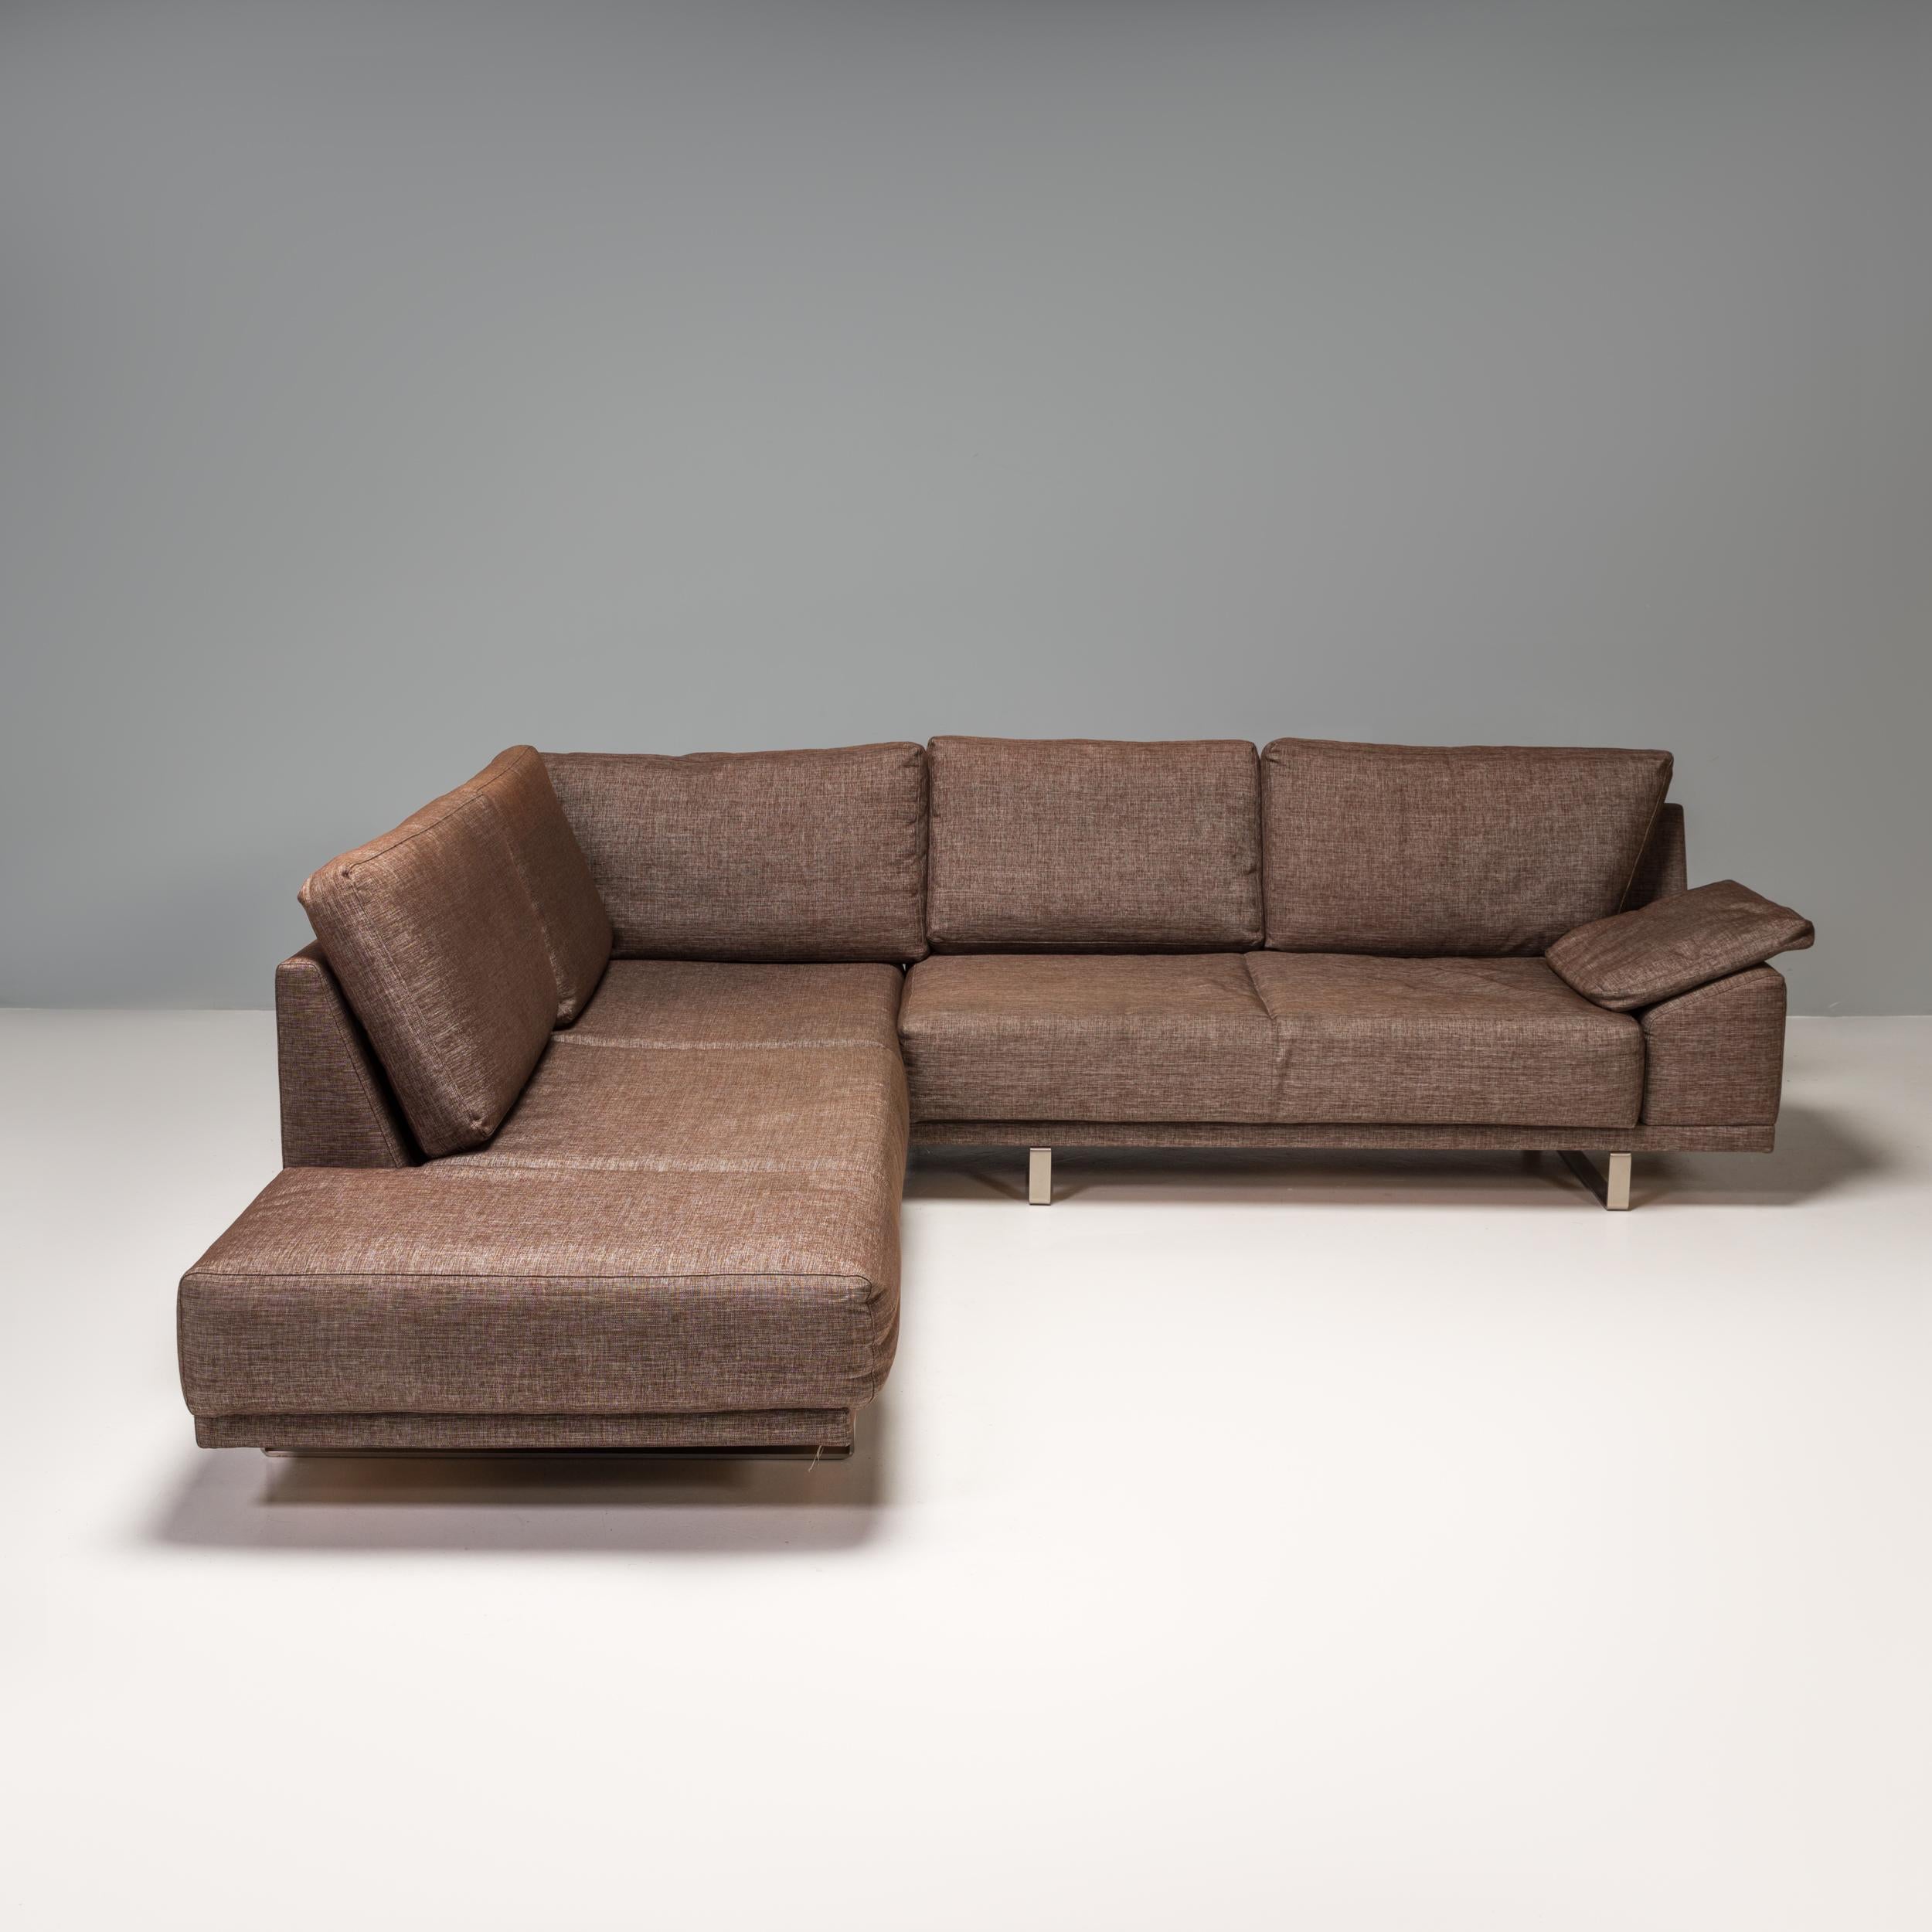 Designed and manufactured by BoConcept, this corner sofa perfectly balances comfort and style.

The deep frame features a wide, angled arm and backrest and sits on curved polished chrome feet.

Fully upholstered in brown fabric, the sofa has